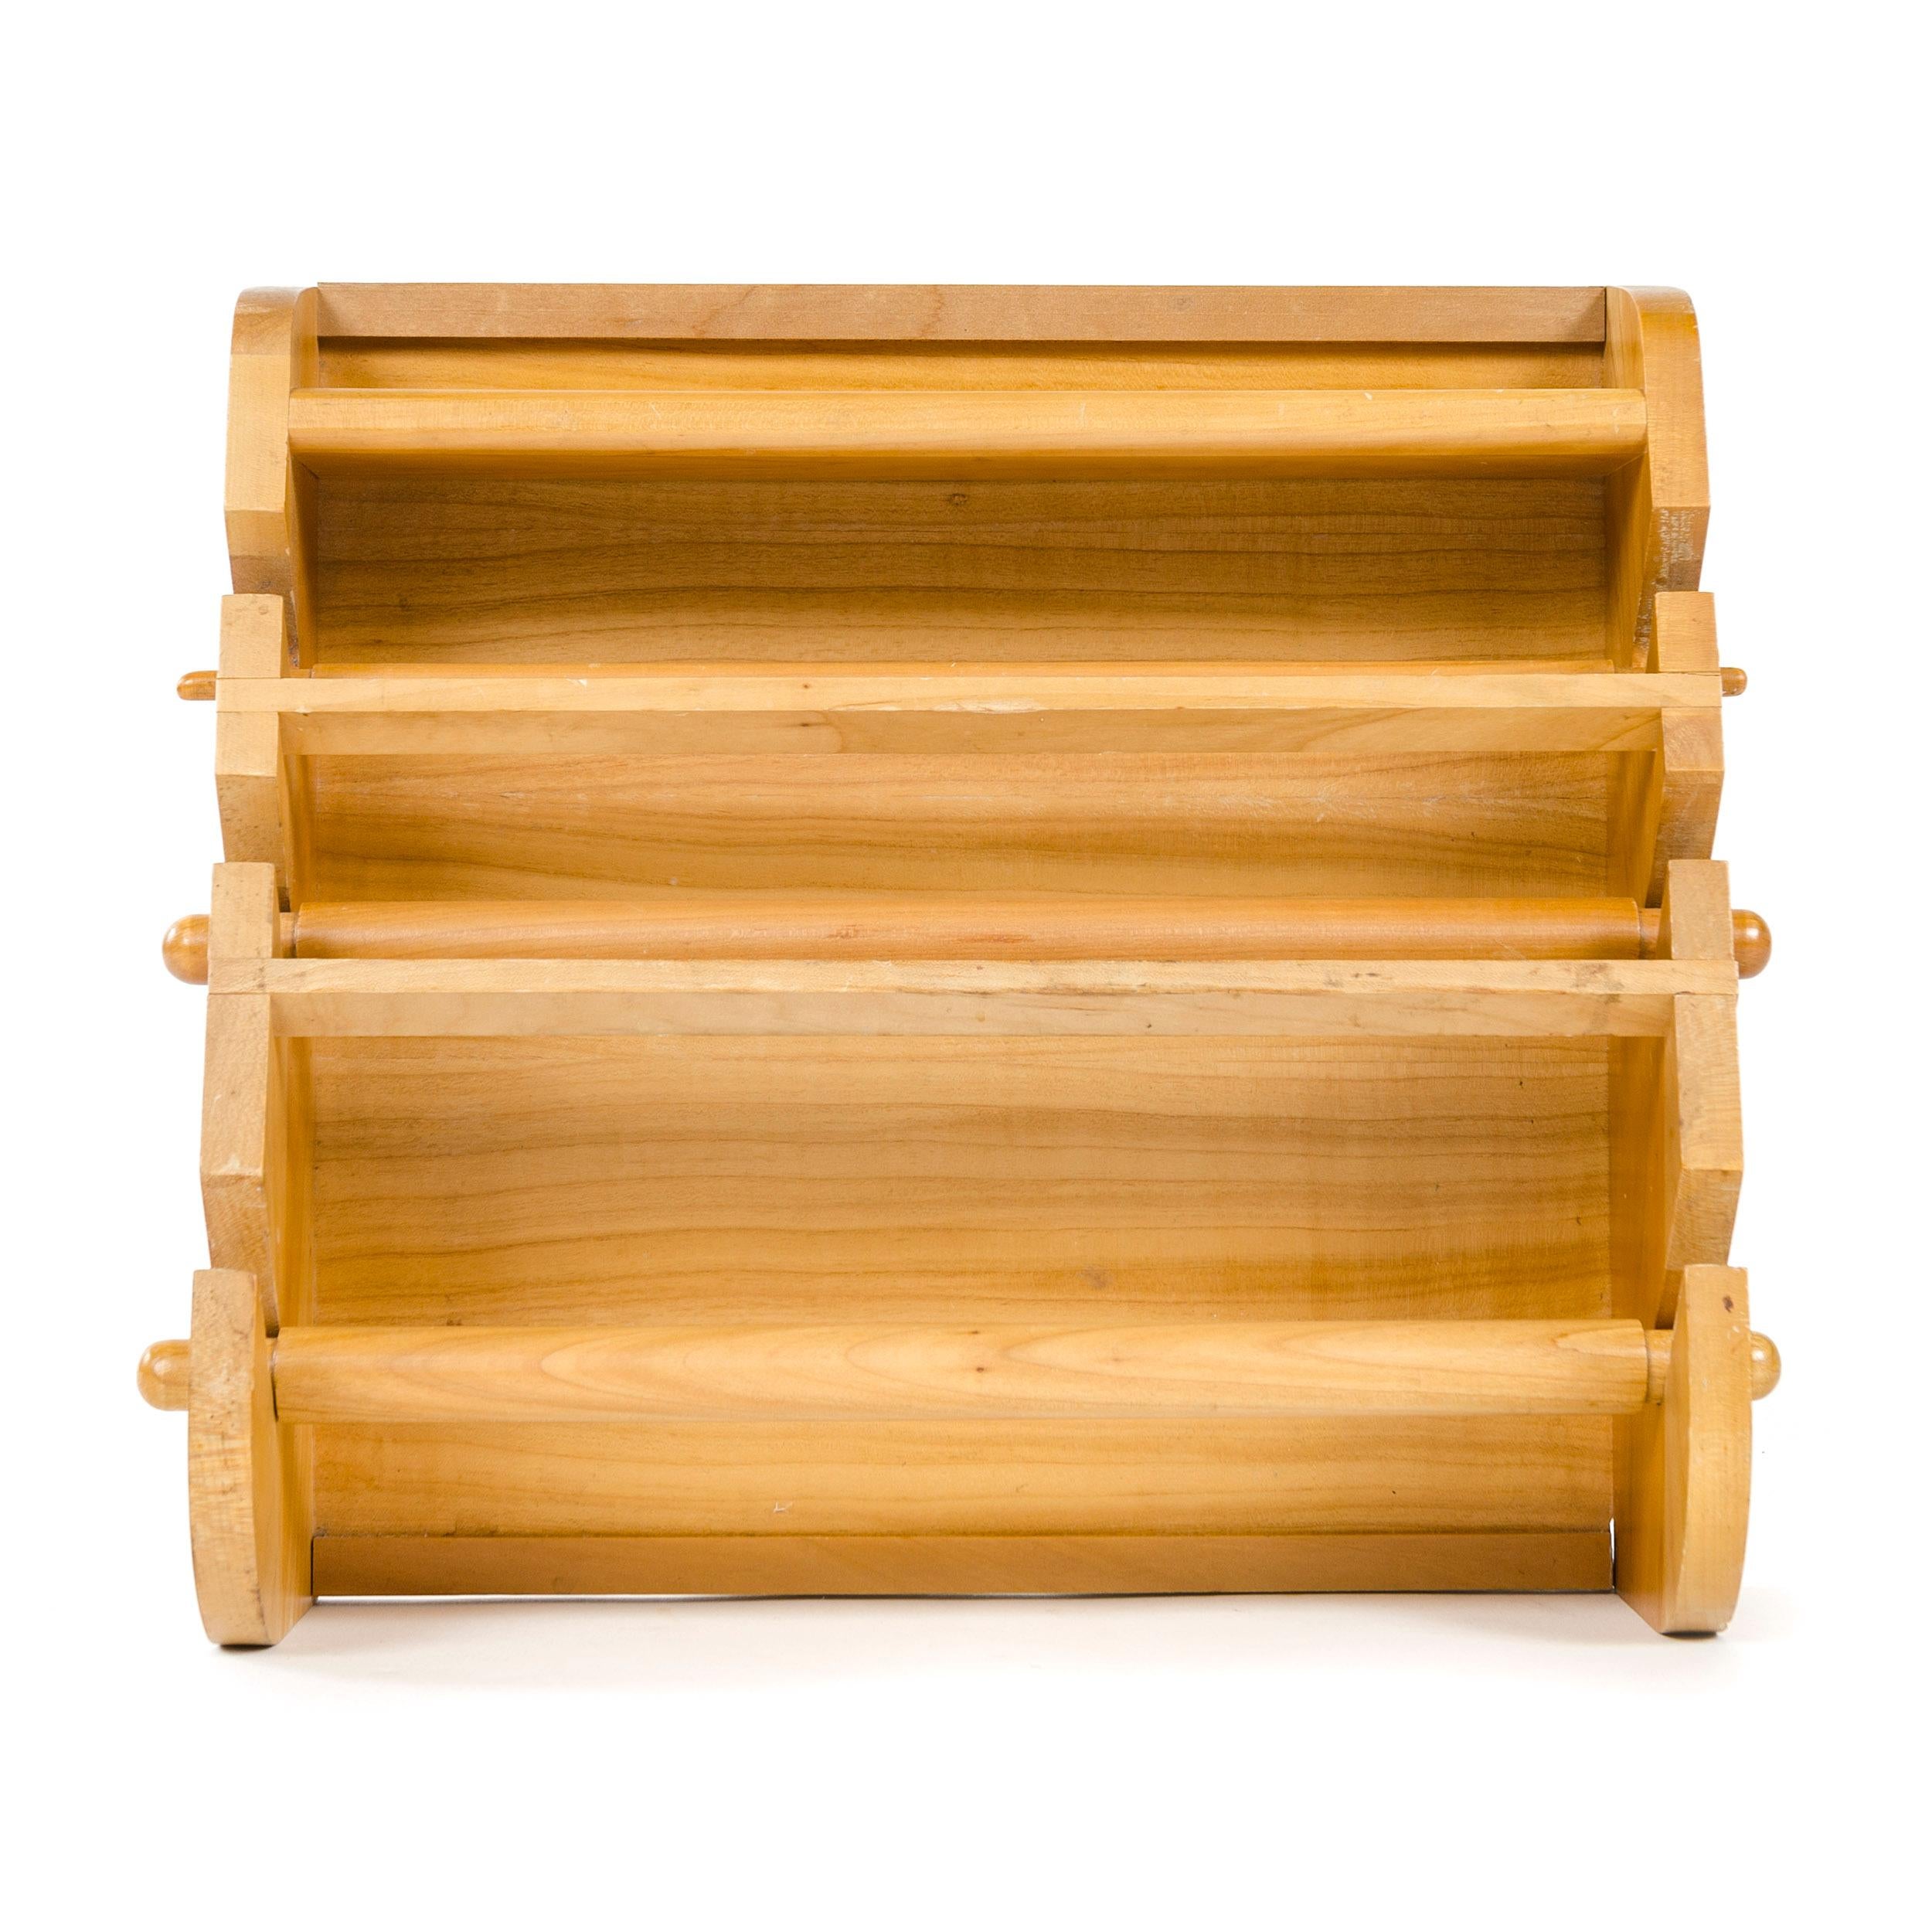 A three-tiered wall mounted wooden towel rack with top shelf and removable rods.